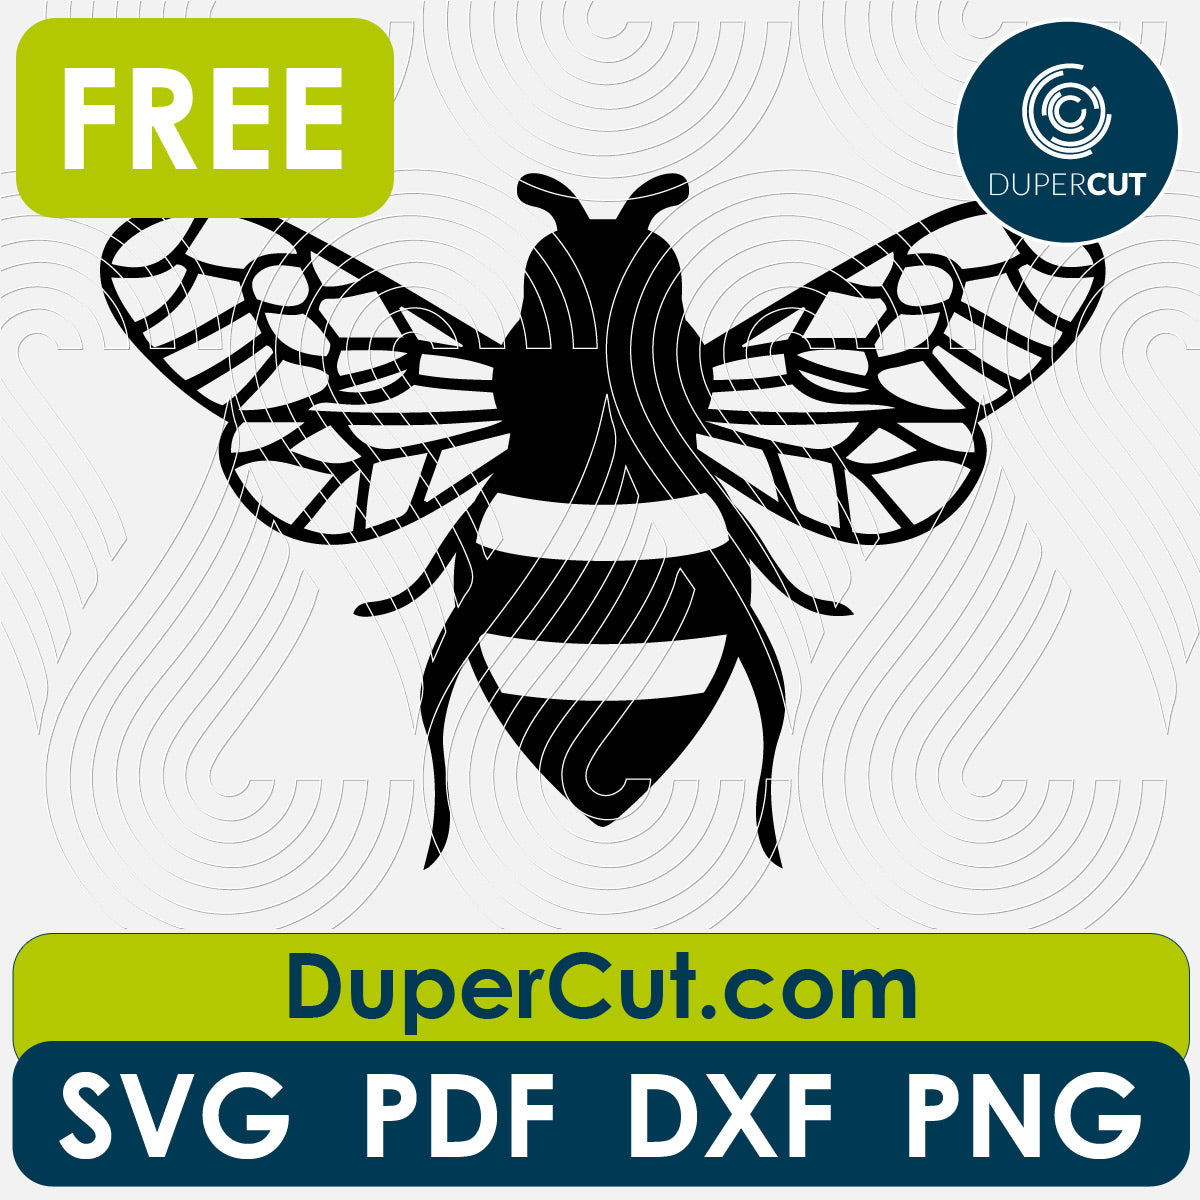 Bee silhouette - free cutting files SVG DXF vector template for laser cutting and engraving. For Glowforge, Cricut, Silhouette, scroll saw, cnc plasma machines by DuperCut